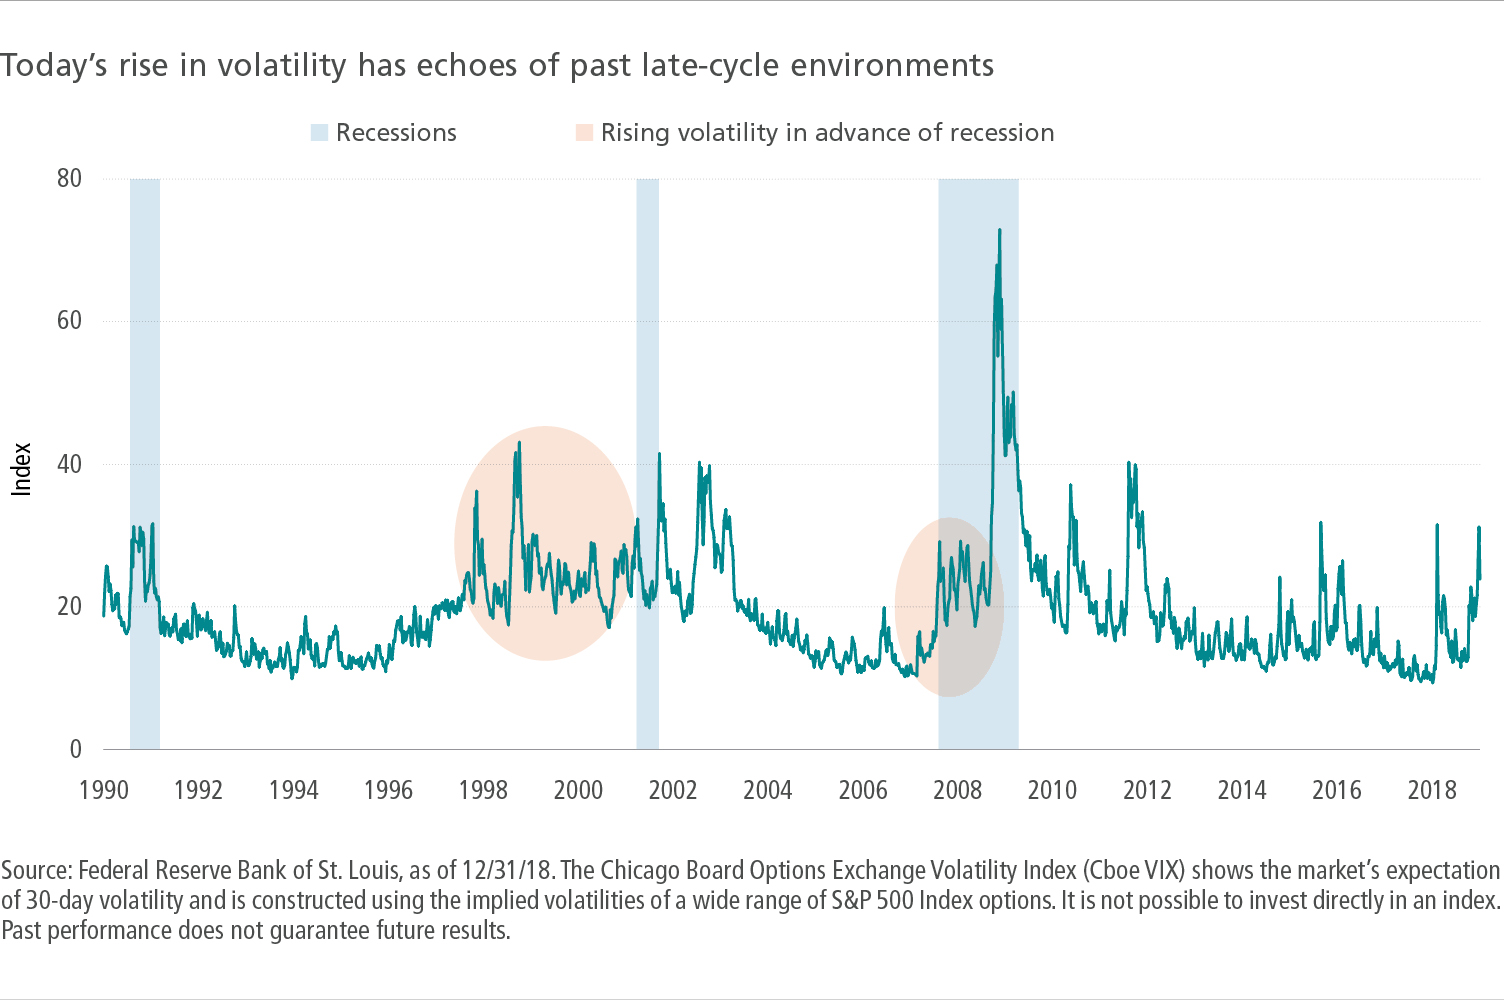 Today's rise in volatility has echoes of past late-cycle environments